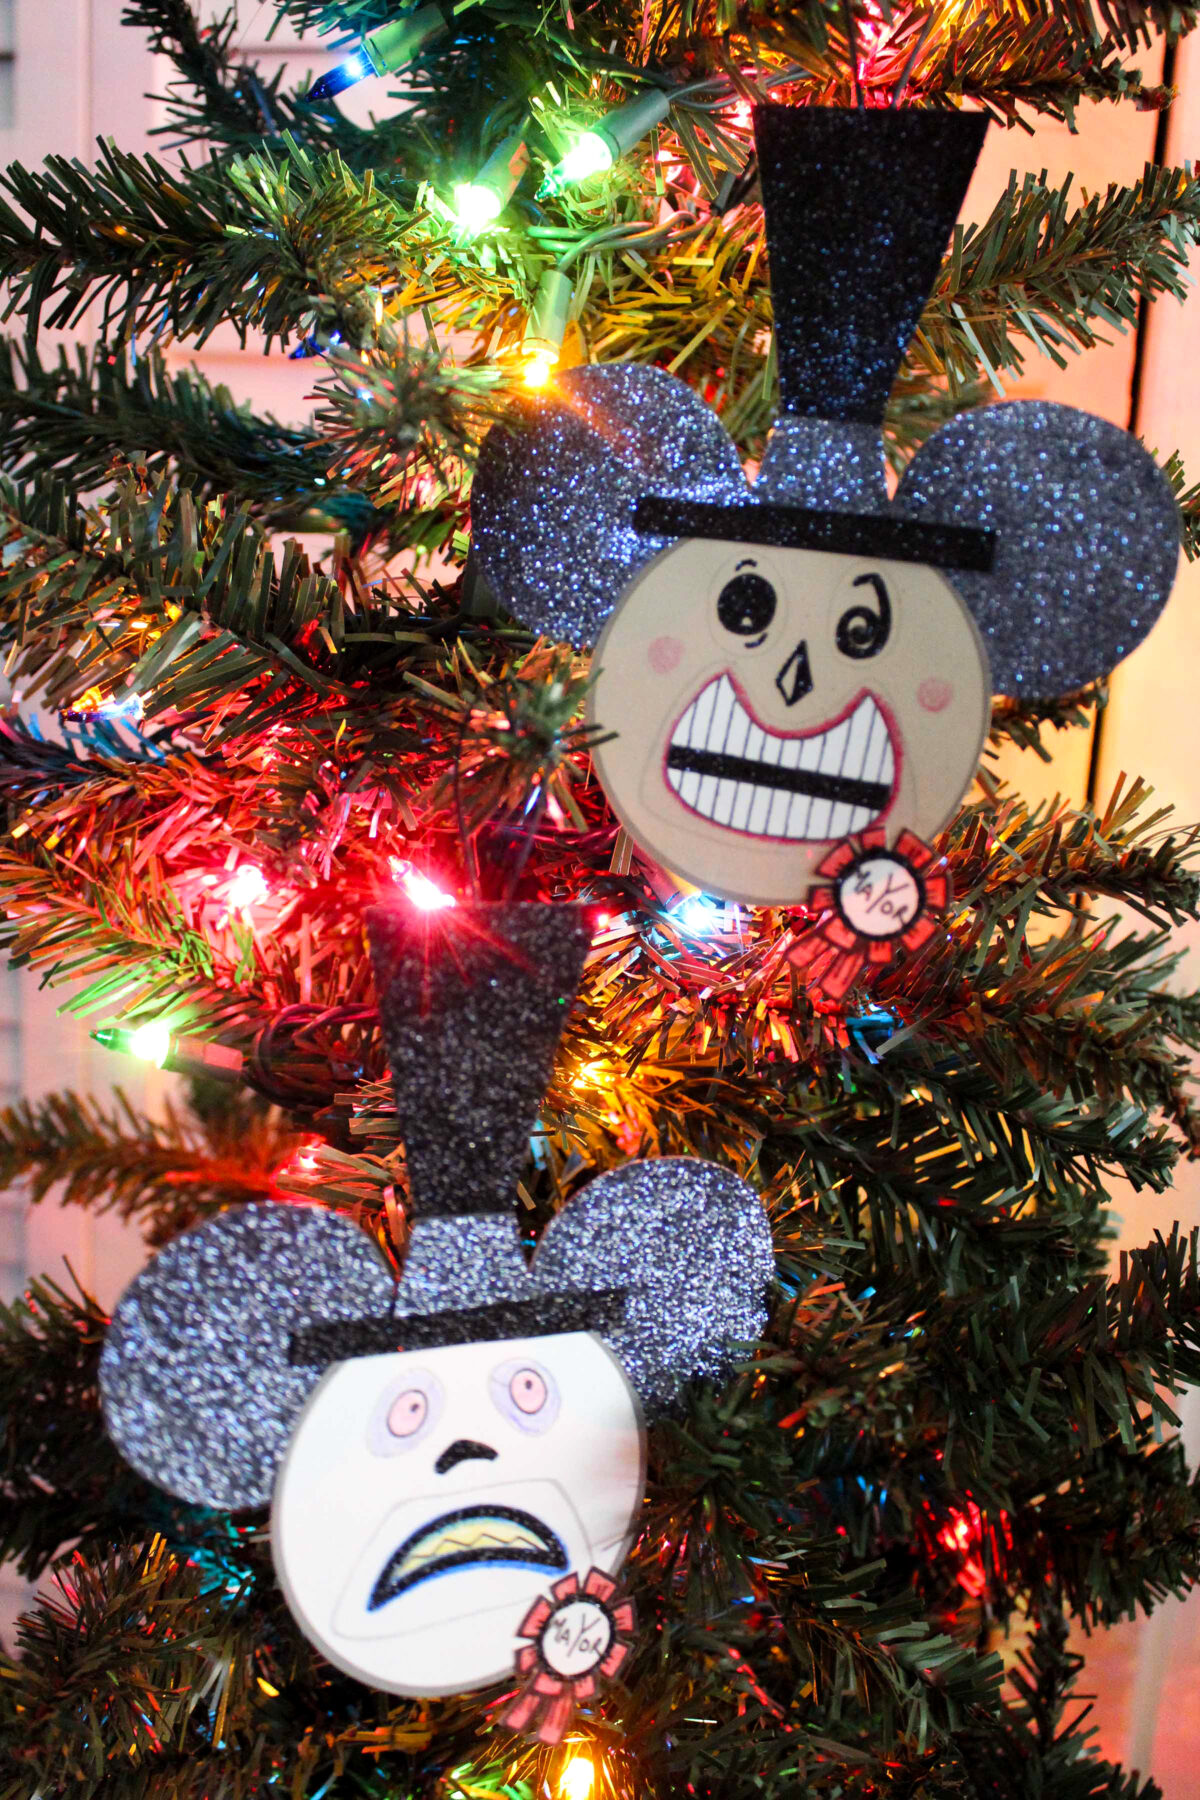 Learn how to make your own Mayor of Halloweentown Mickey Ears Ornament. It's perfect for anyone who loves Nightmare Before Christmas.